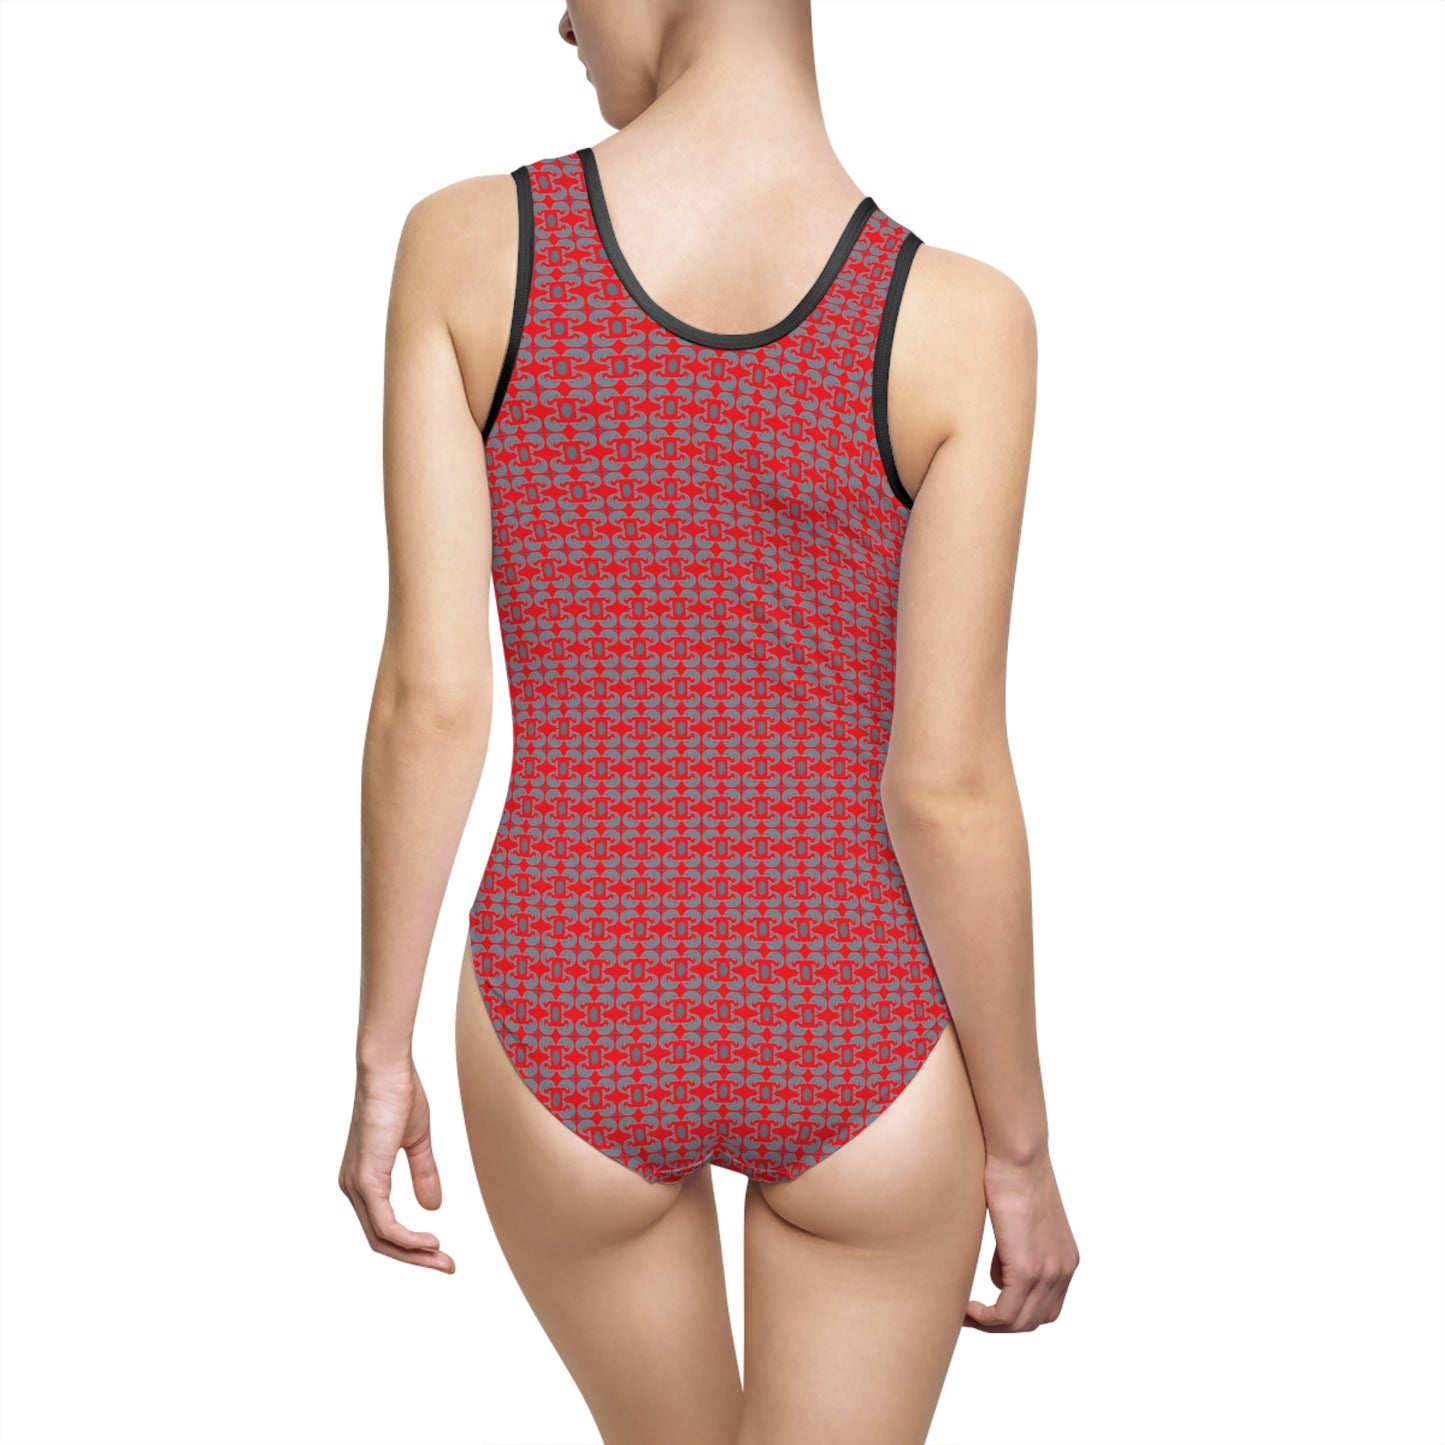 Playful Dolphins - Red ff0000 - Women's Classic One-Piece Swimsuit